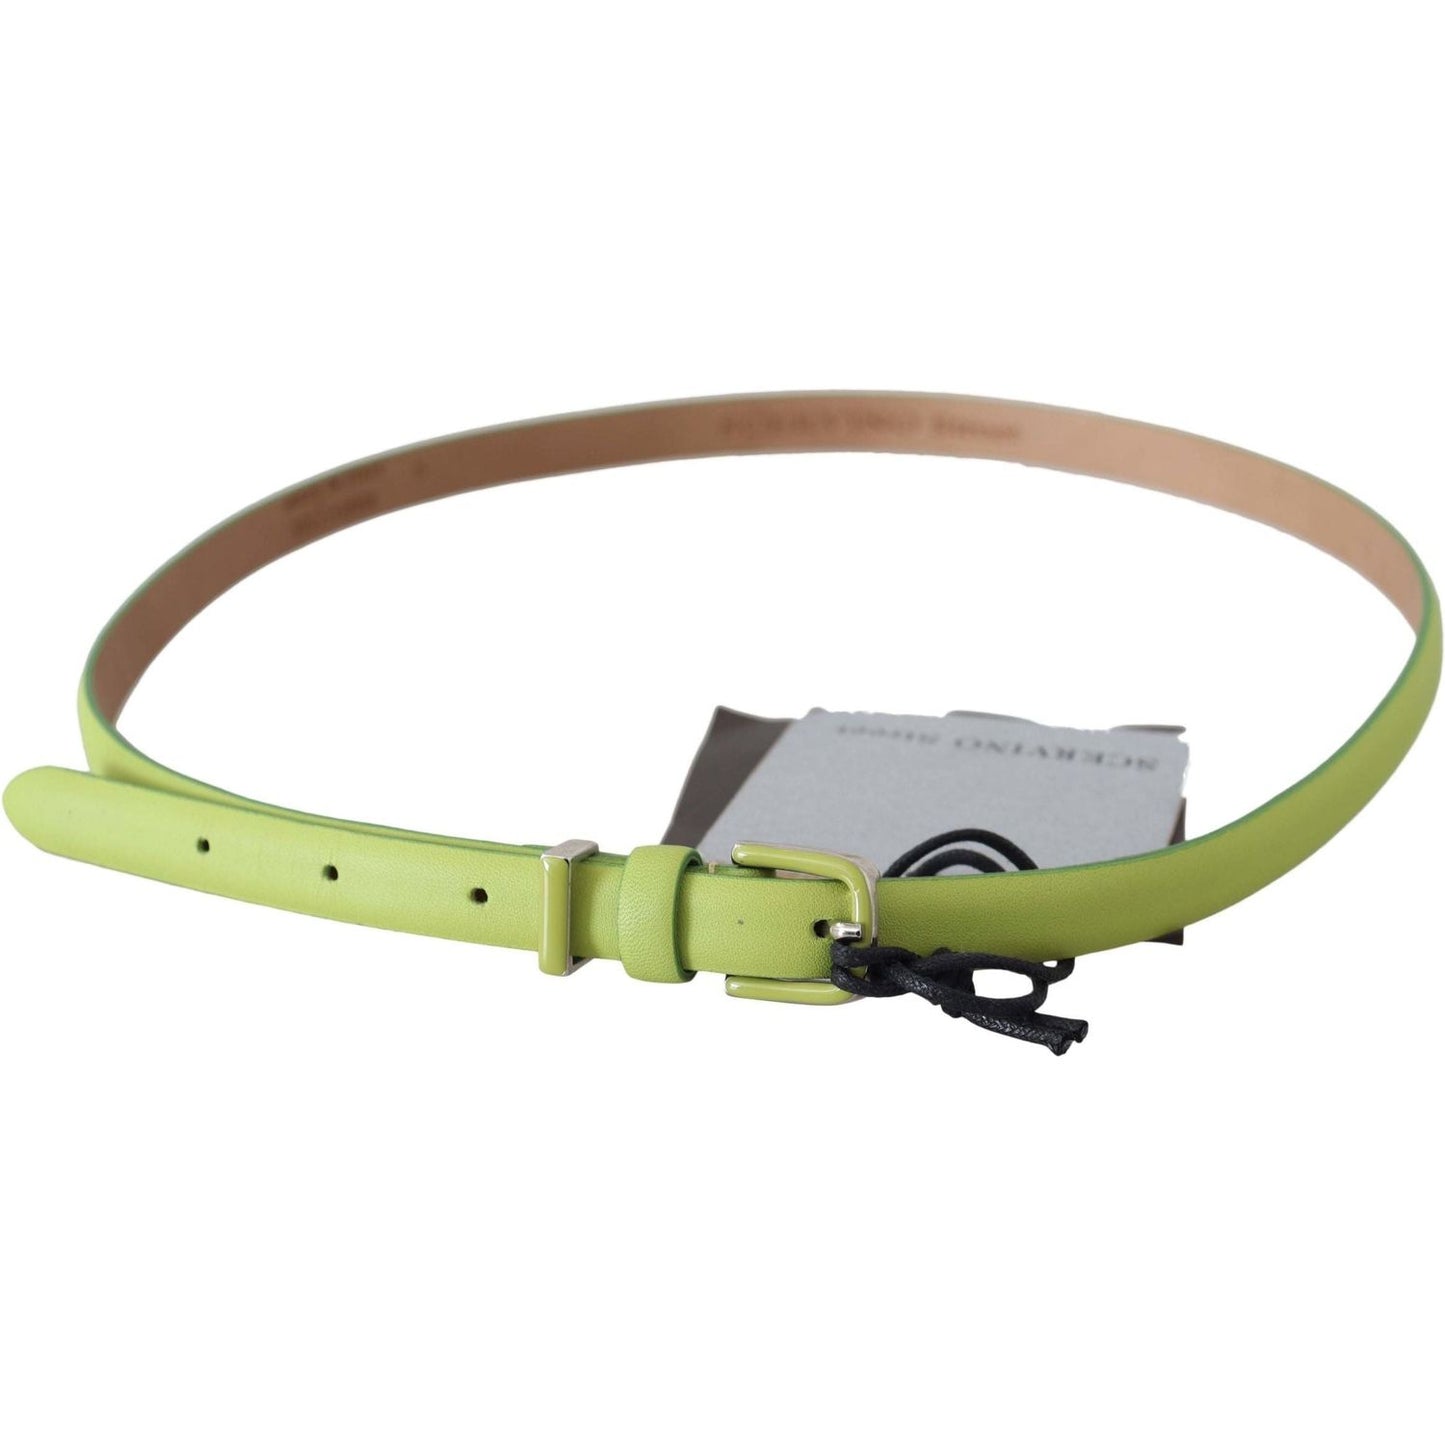 Scervino Street Classic Green Leather Belt with Silver-Tone Hardware green-leather-chartreuse-silver-green-buckle-belt Belt IMG_6305-scaled-f31ff73e-b07.jpg